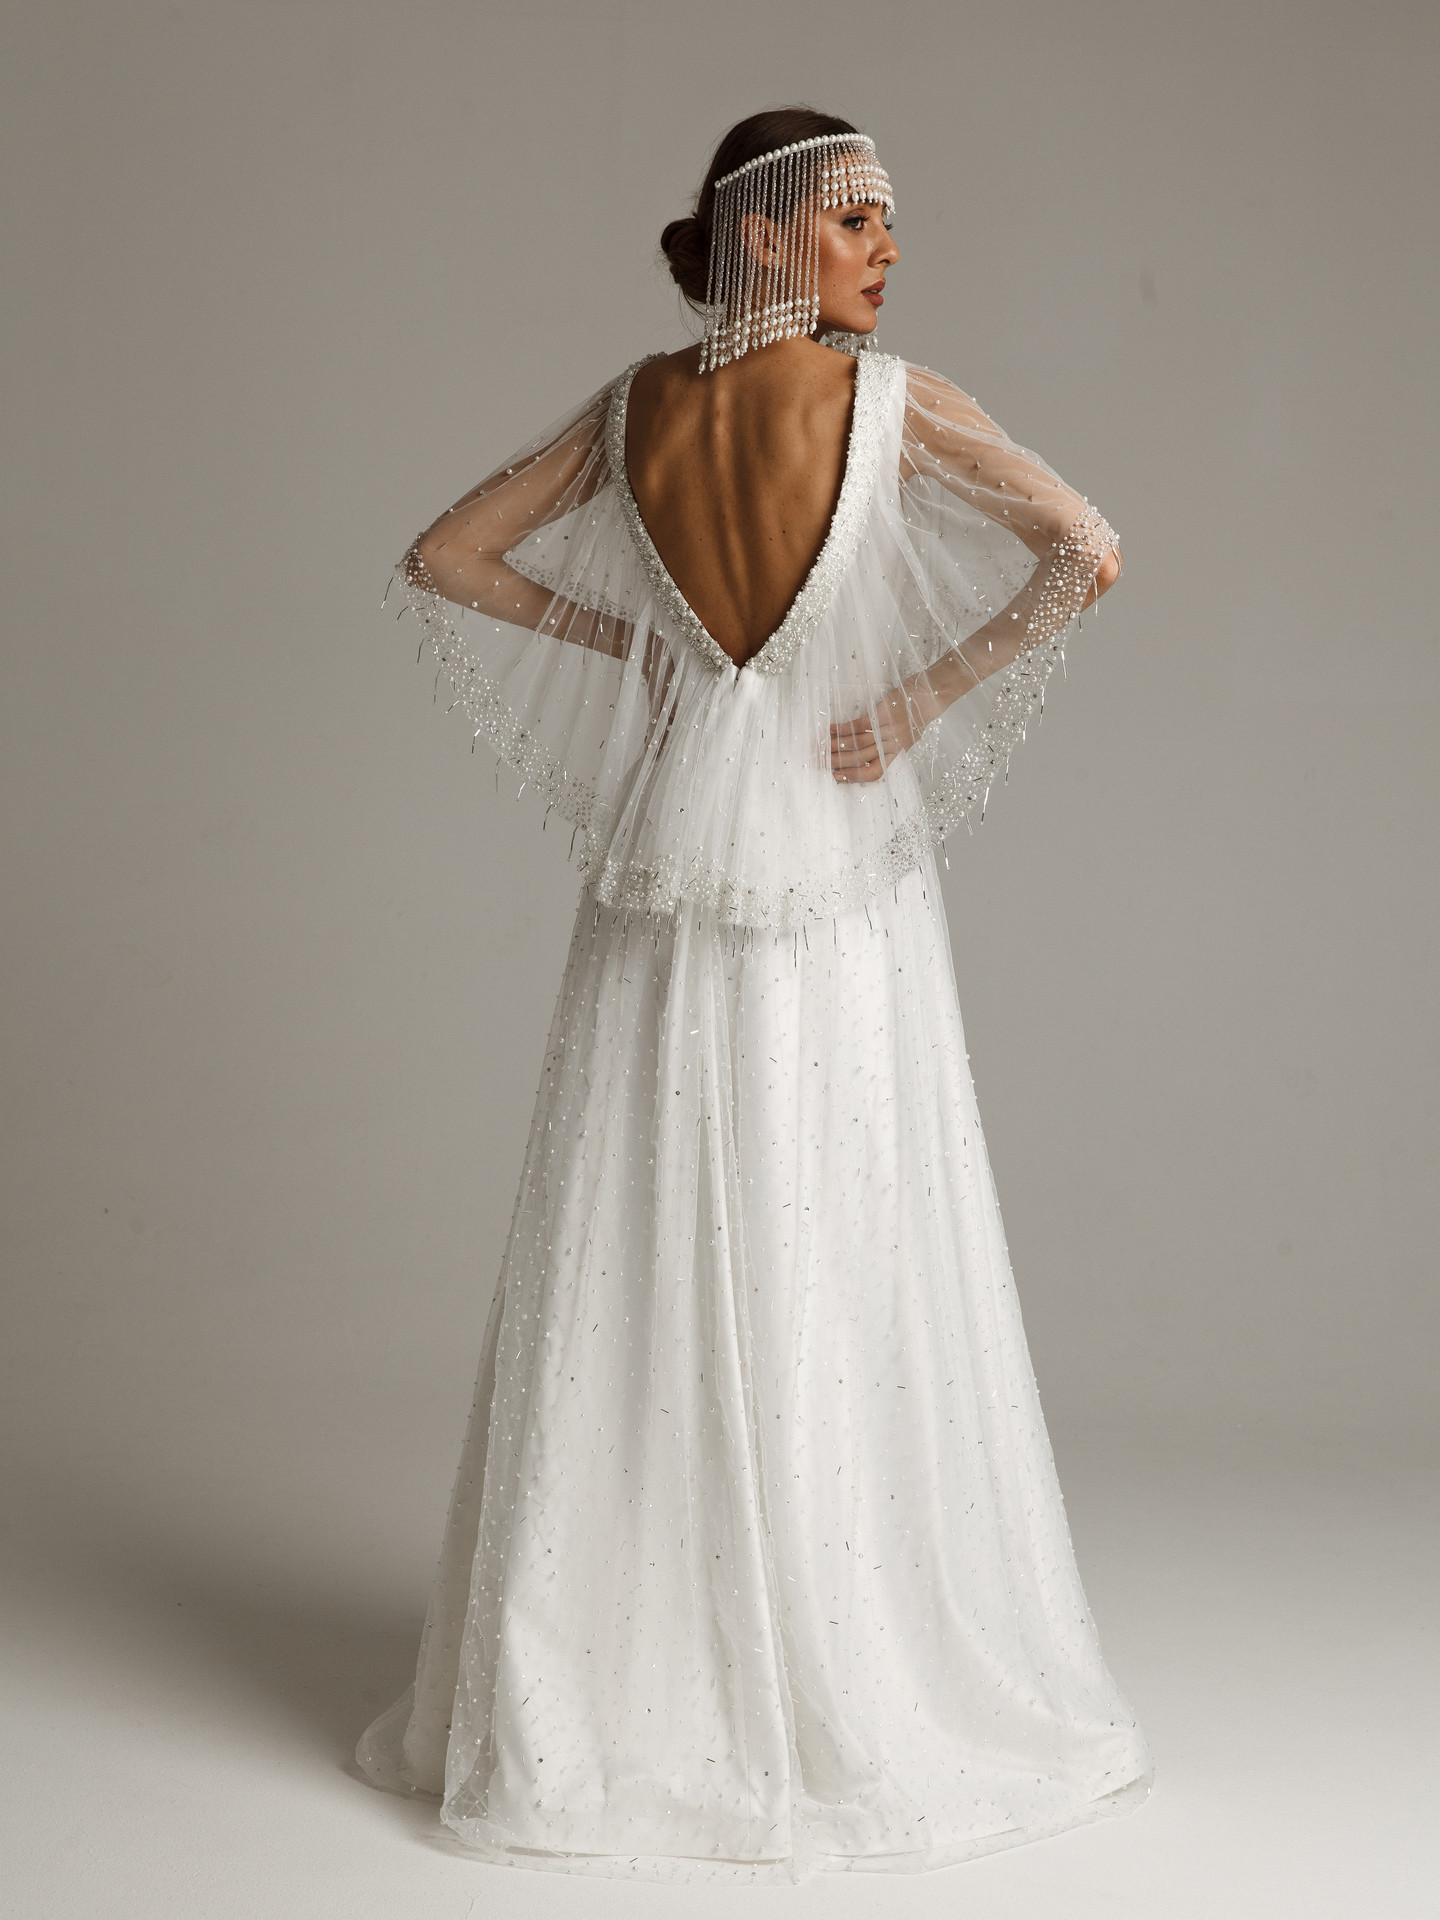 Reyna gown, 2021, couture, dress, bridal, off-white, Reyna, A-line, embroidery